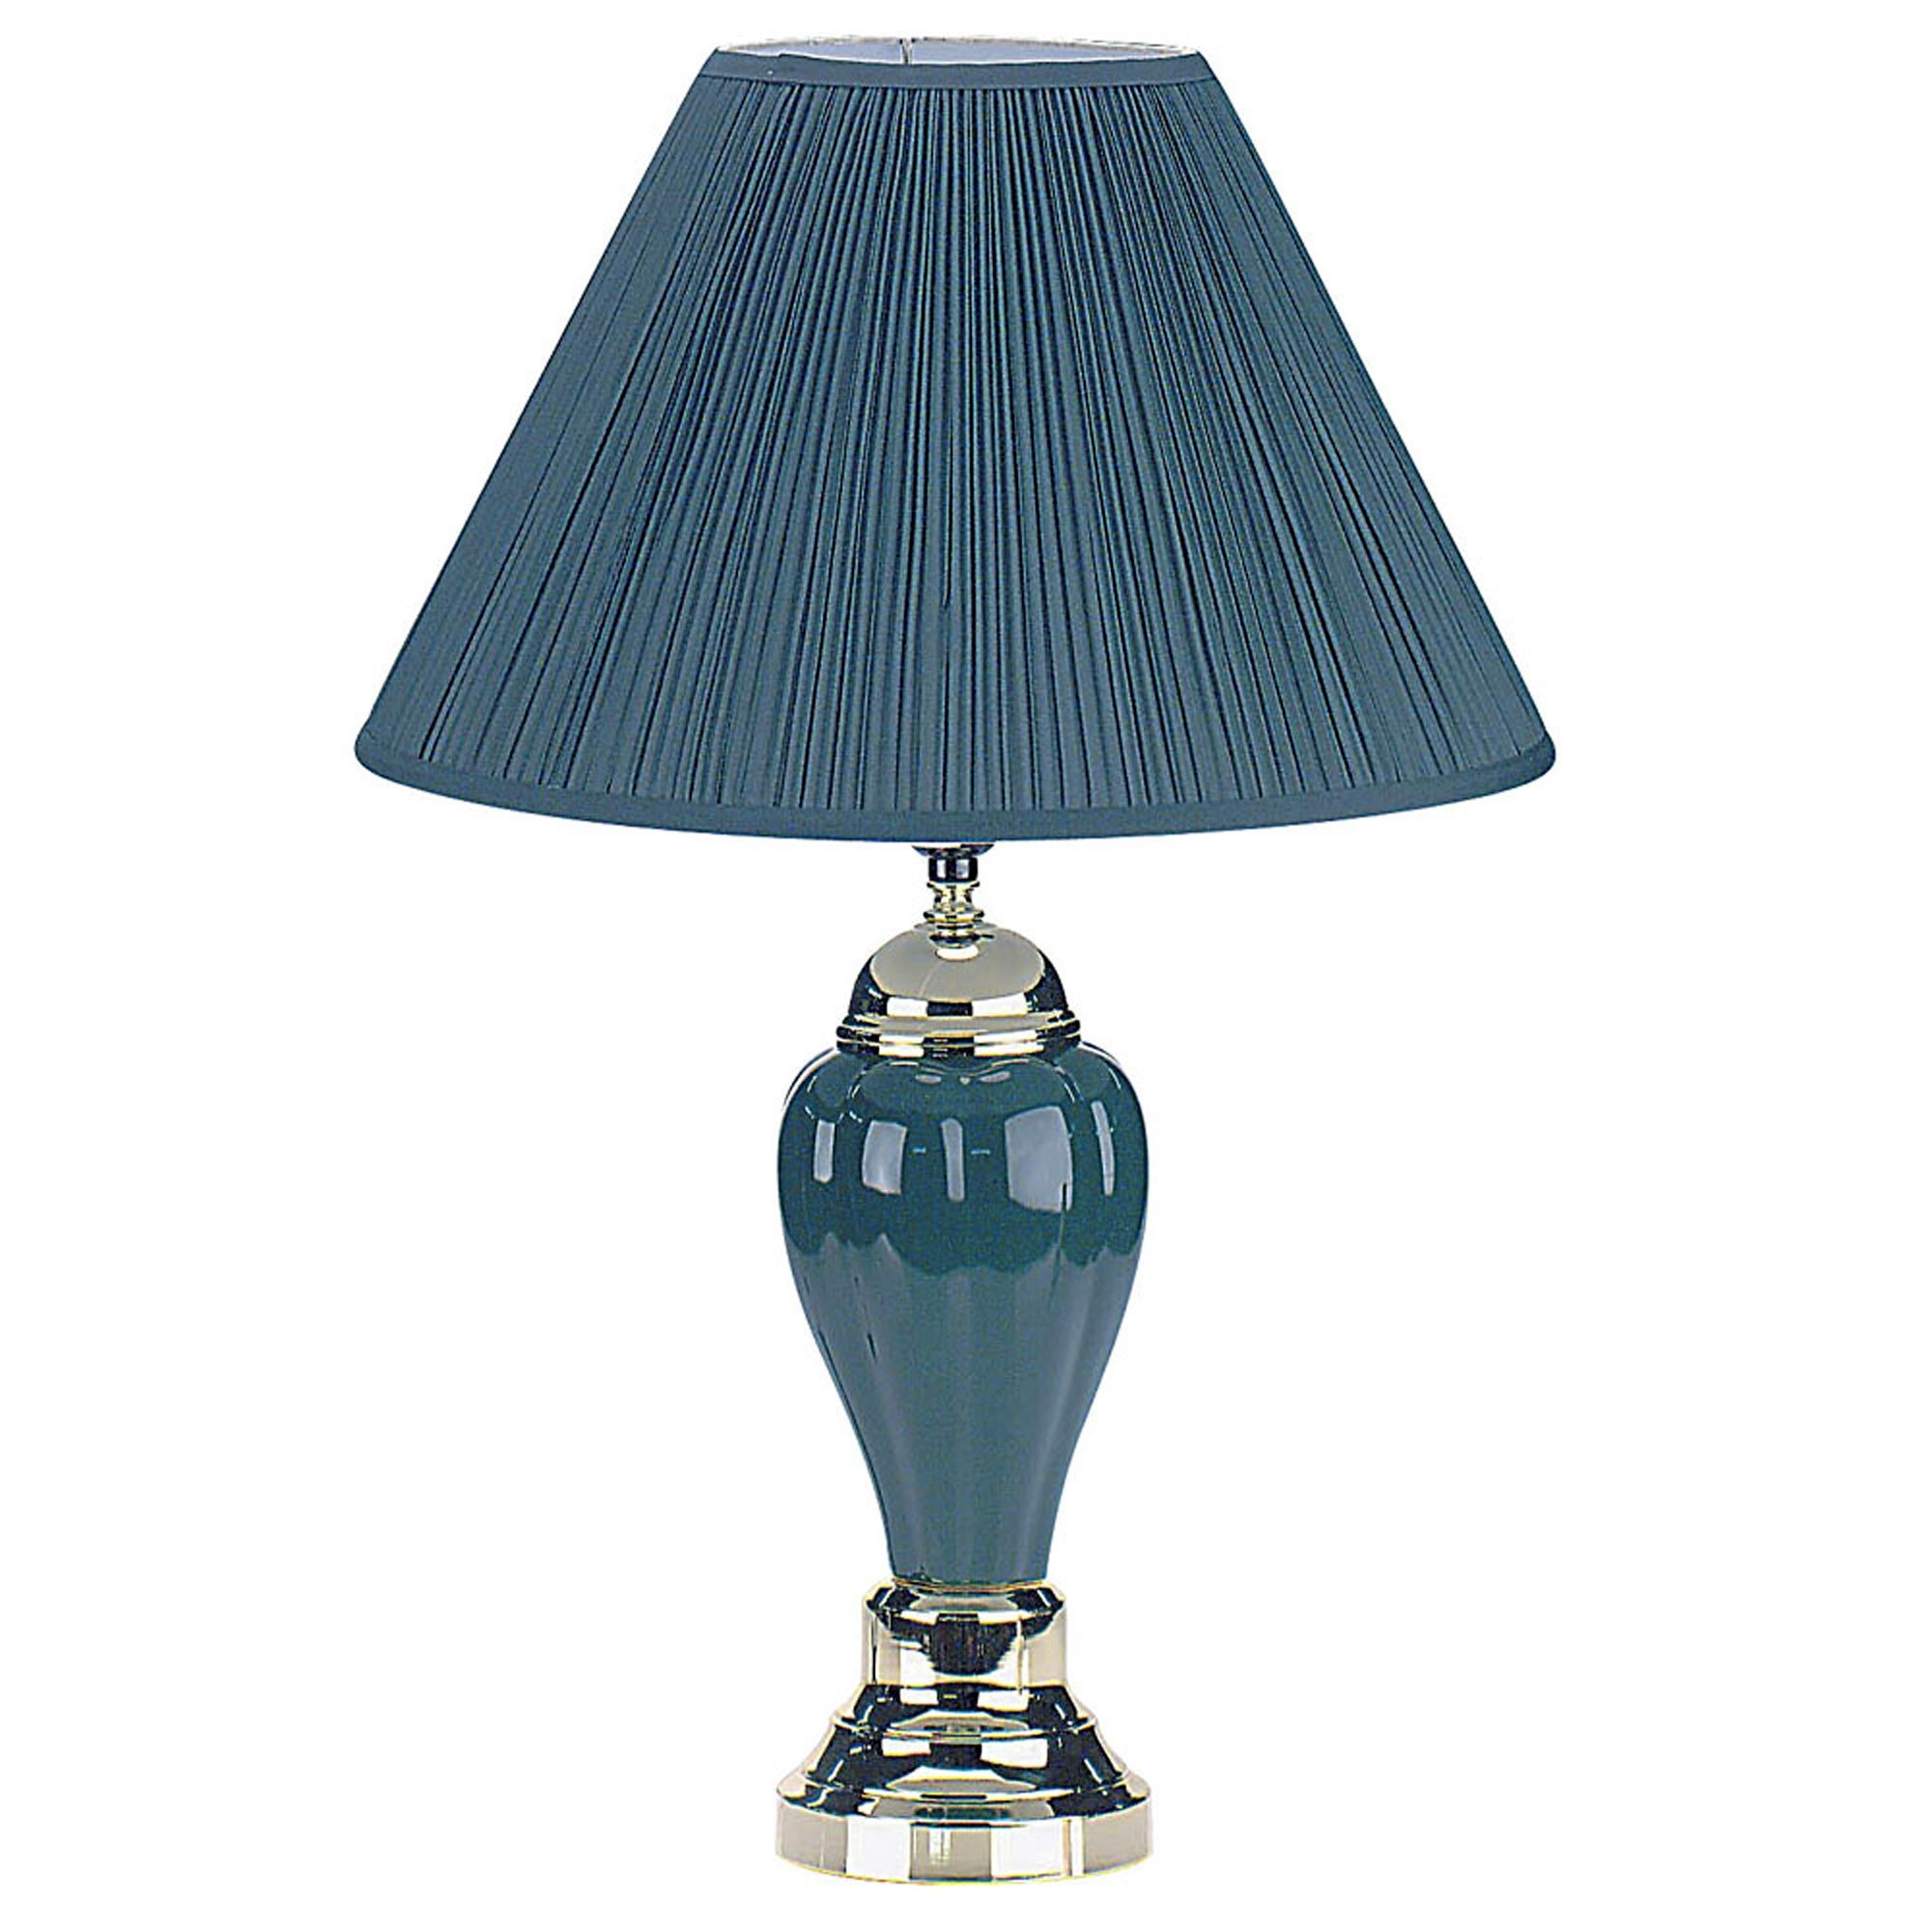 27" Teal Blue and Gold Ceramic Urn Table Lamp With Teal Blue Empire Shade-468526-1